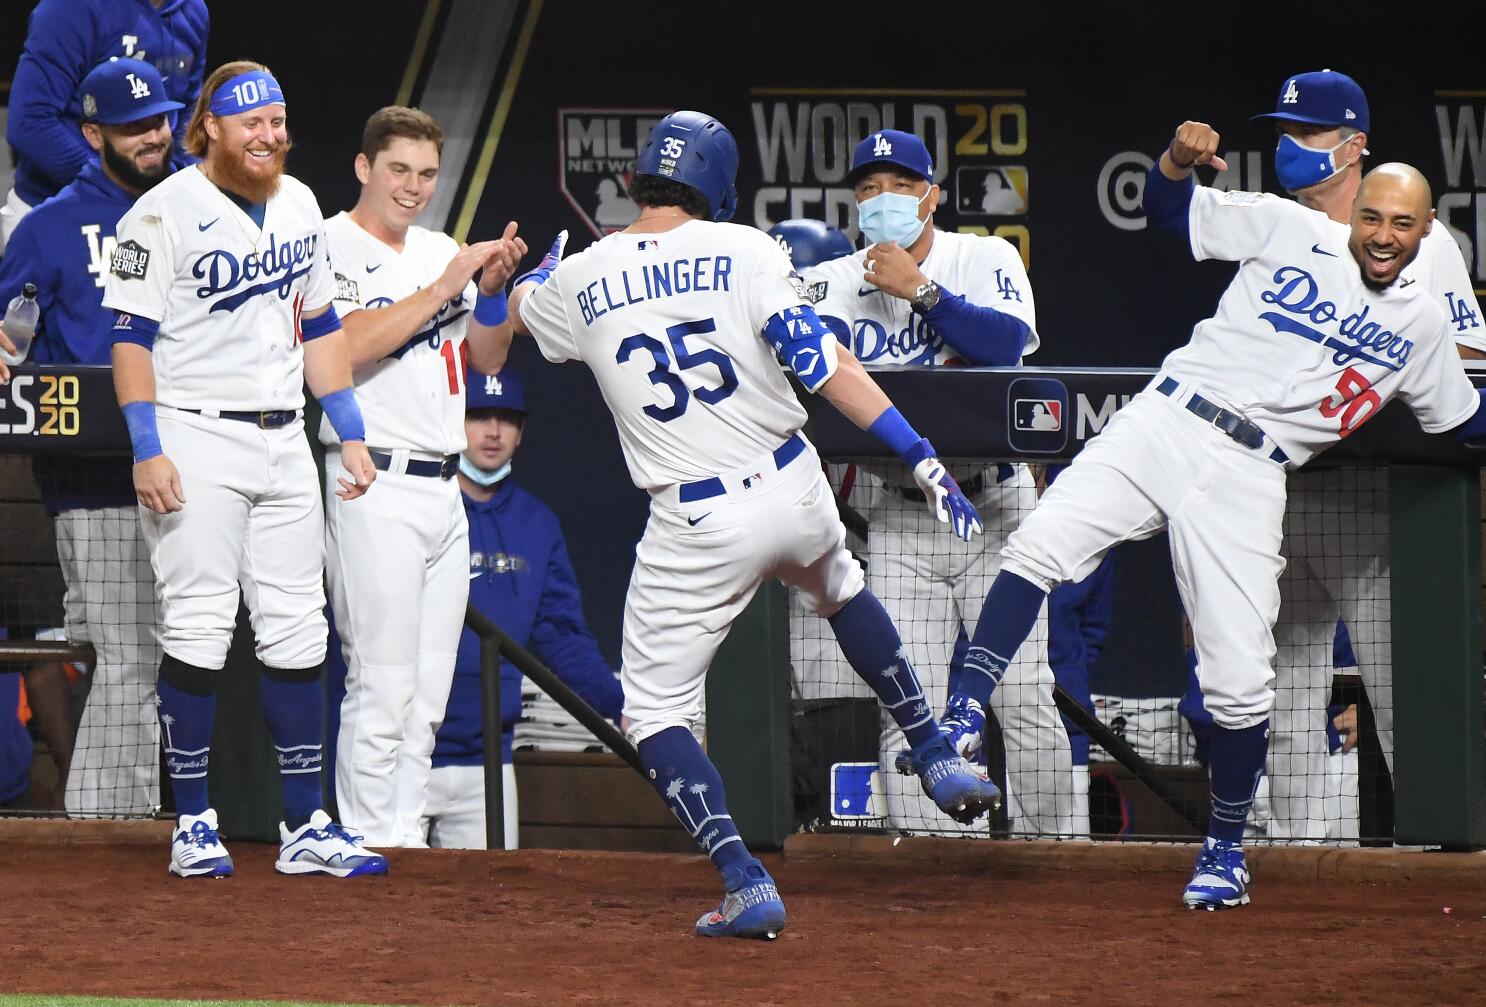 Los Angeles Dodgers too hot for Tampa Bay Rays in Game 1 of World